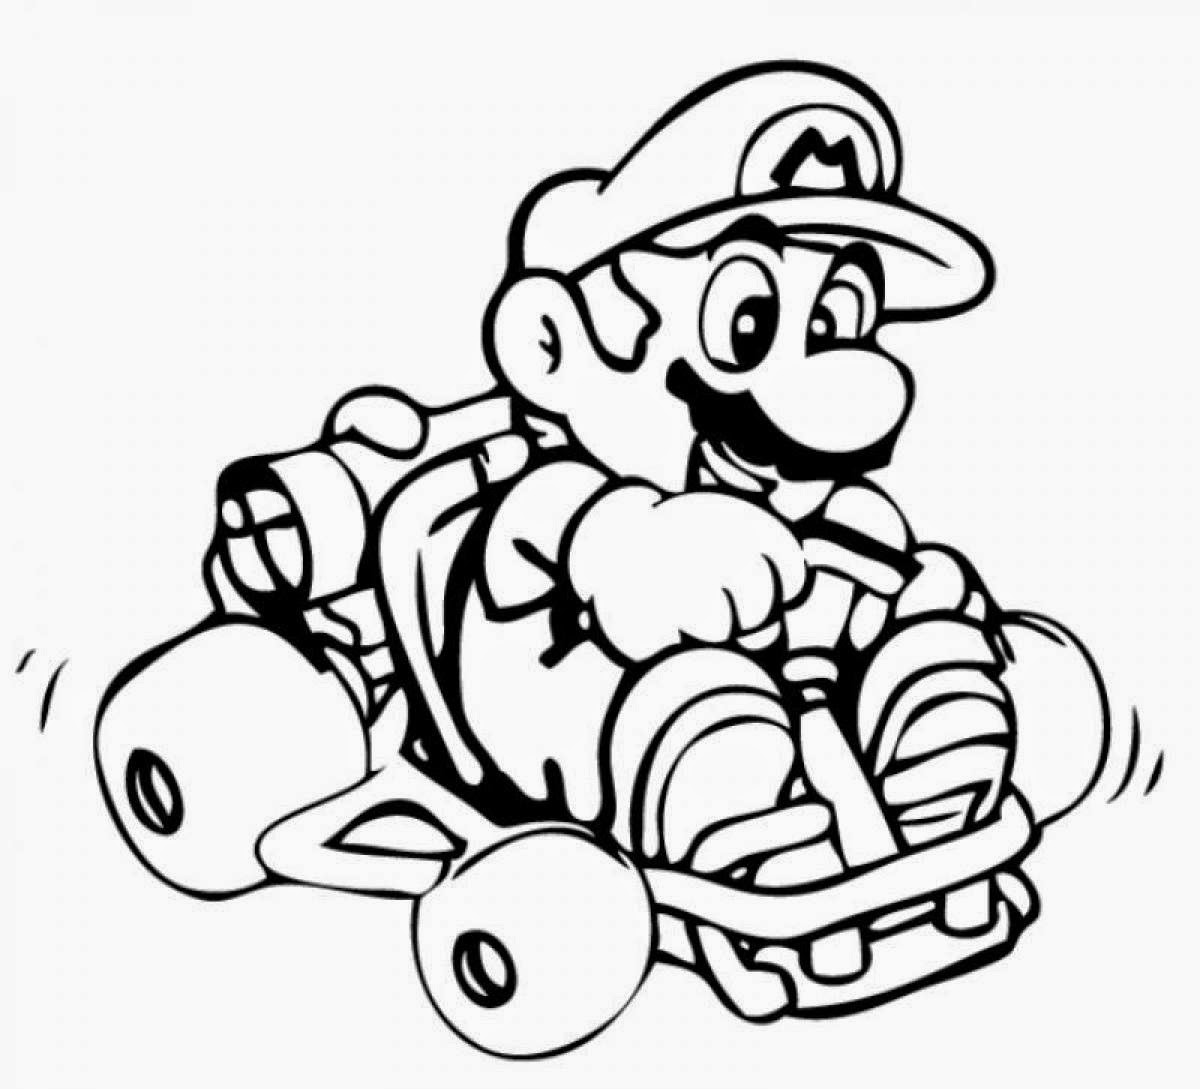 Mario Printable Coloring Pages
 Coloring Pages Mario Coloring Pages Free and Printable